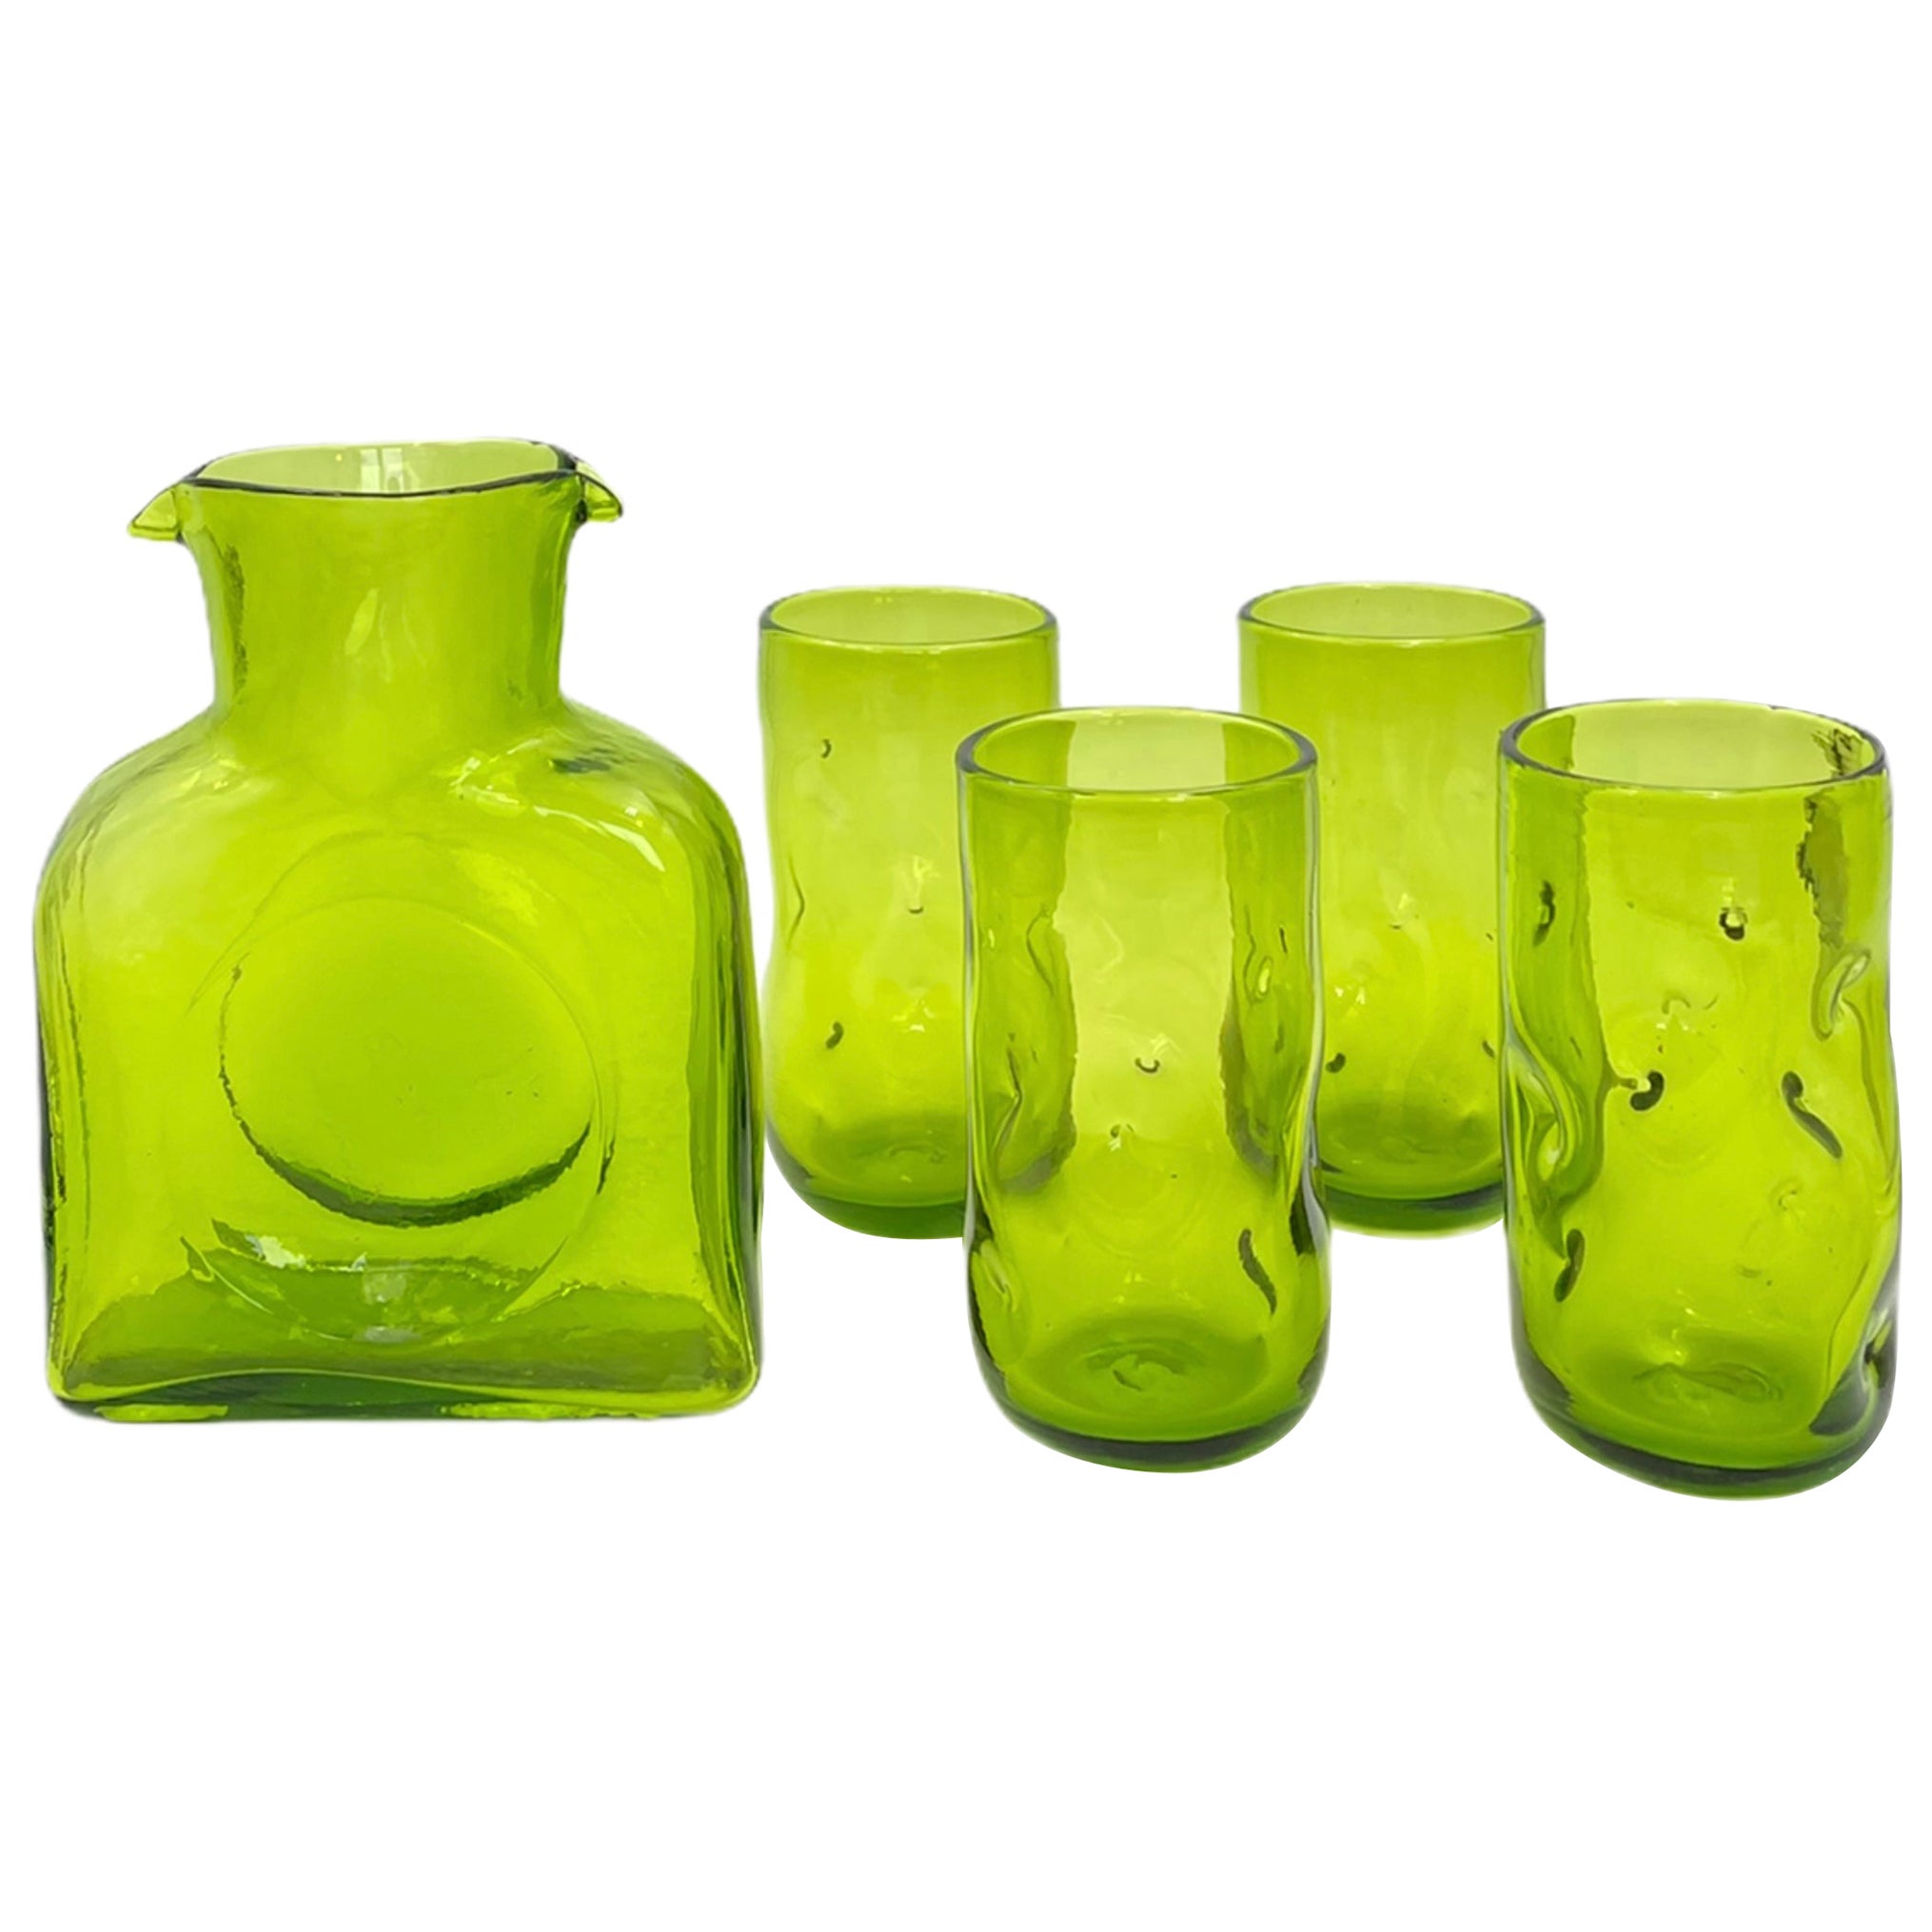 Blenko Glass Double Spouted Pitcher Decanter Set For Sale